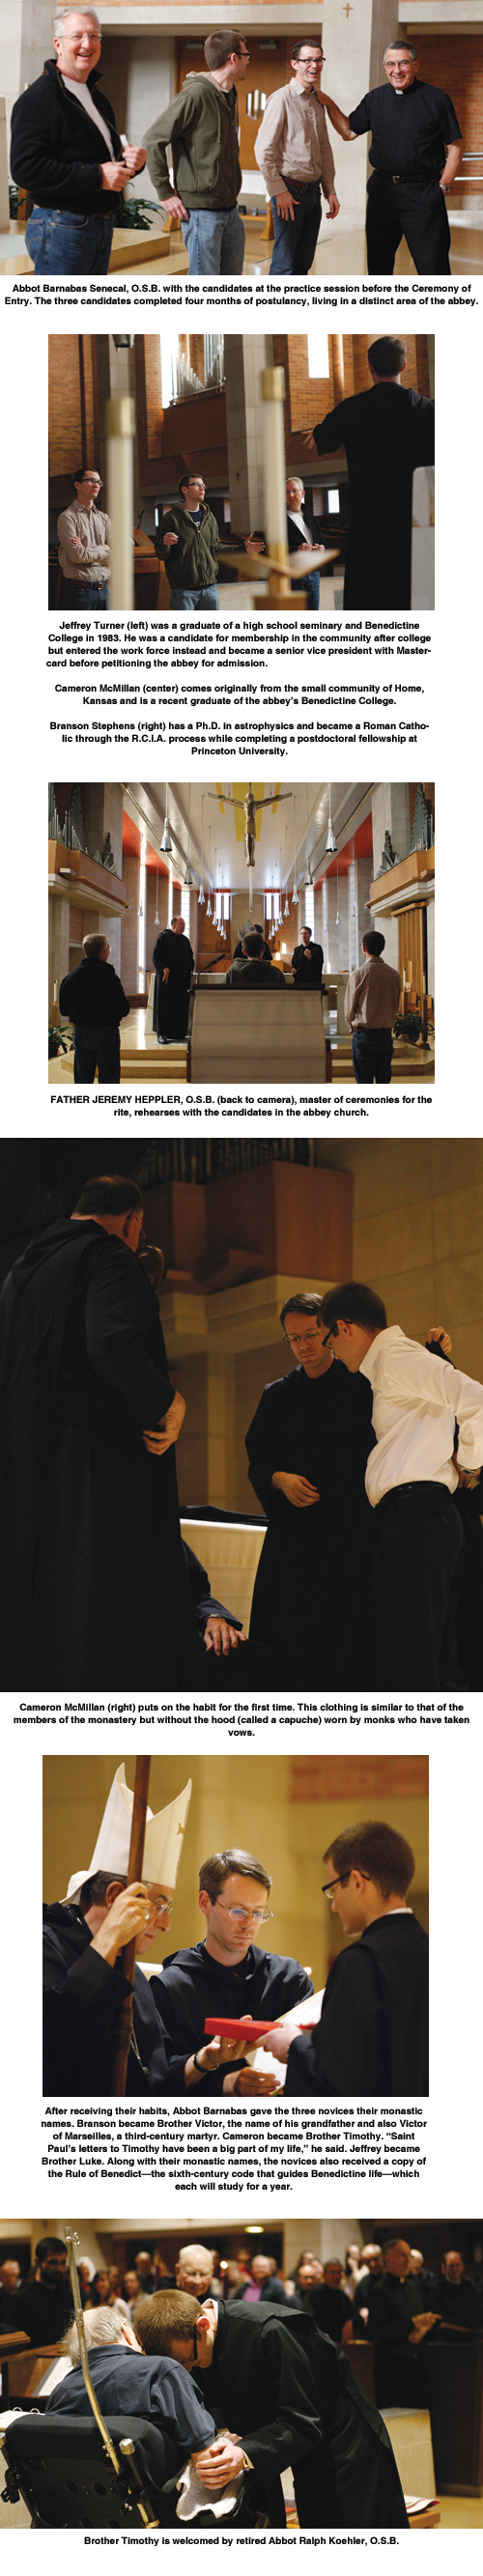 various photos of Jeffrey Turner, Cameron McMillan, and Branson Stephens as they become novices